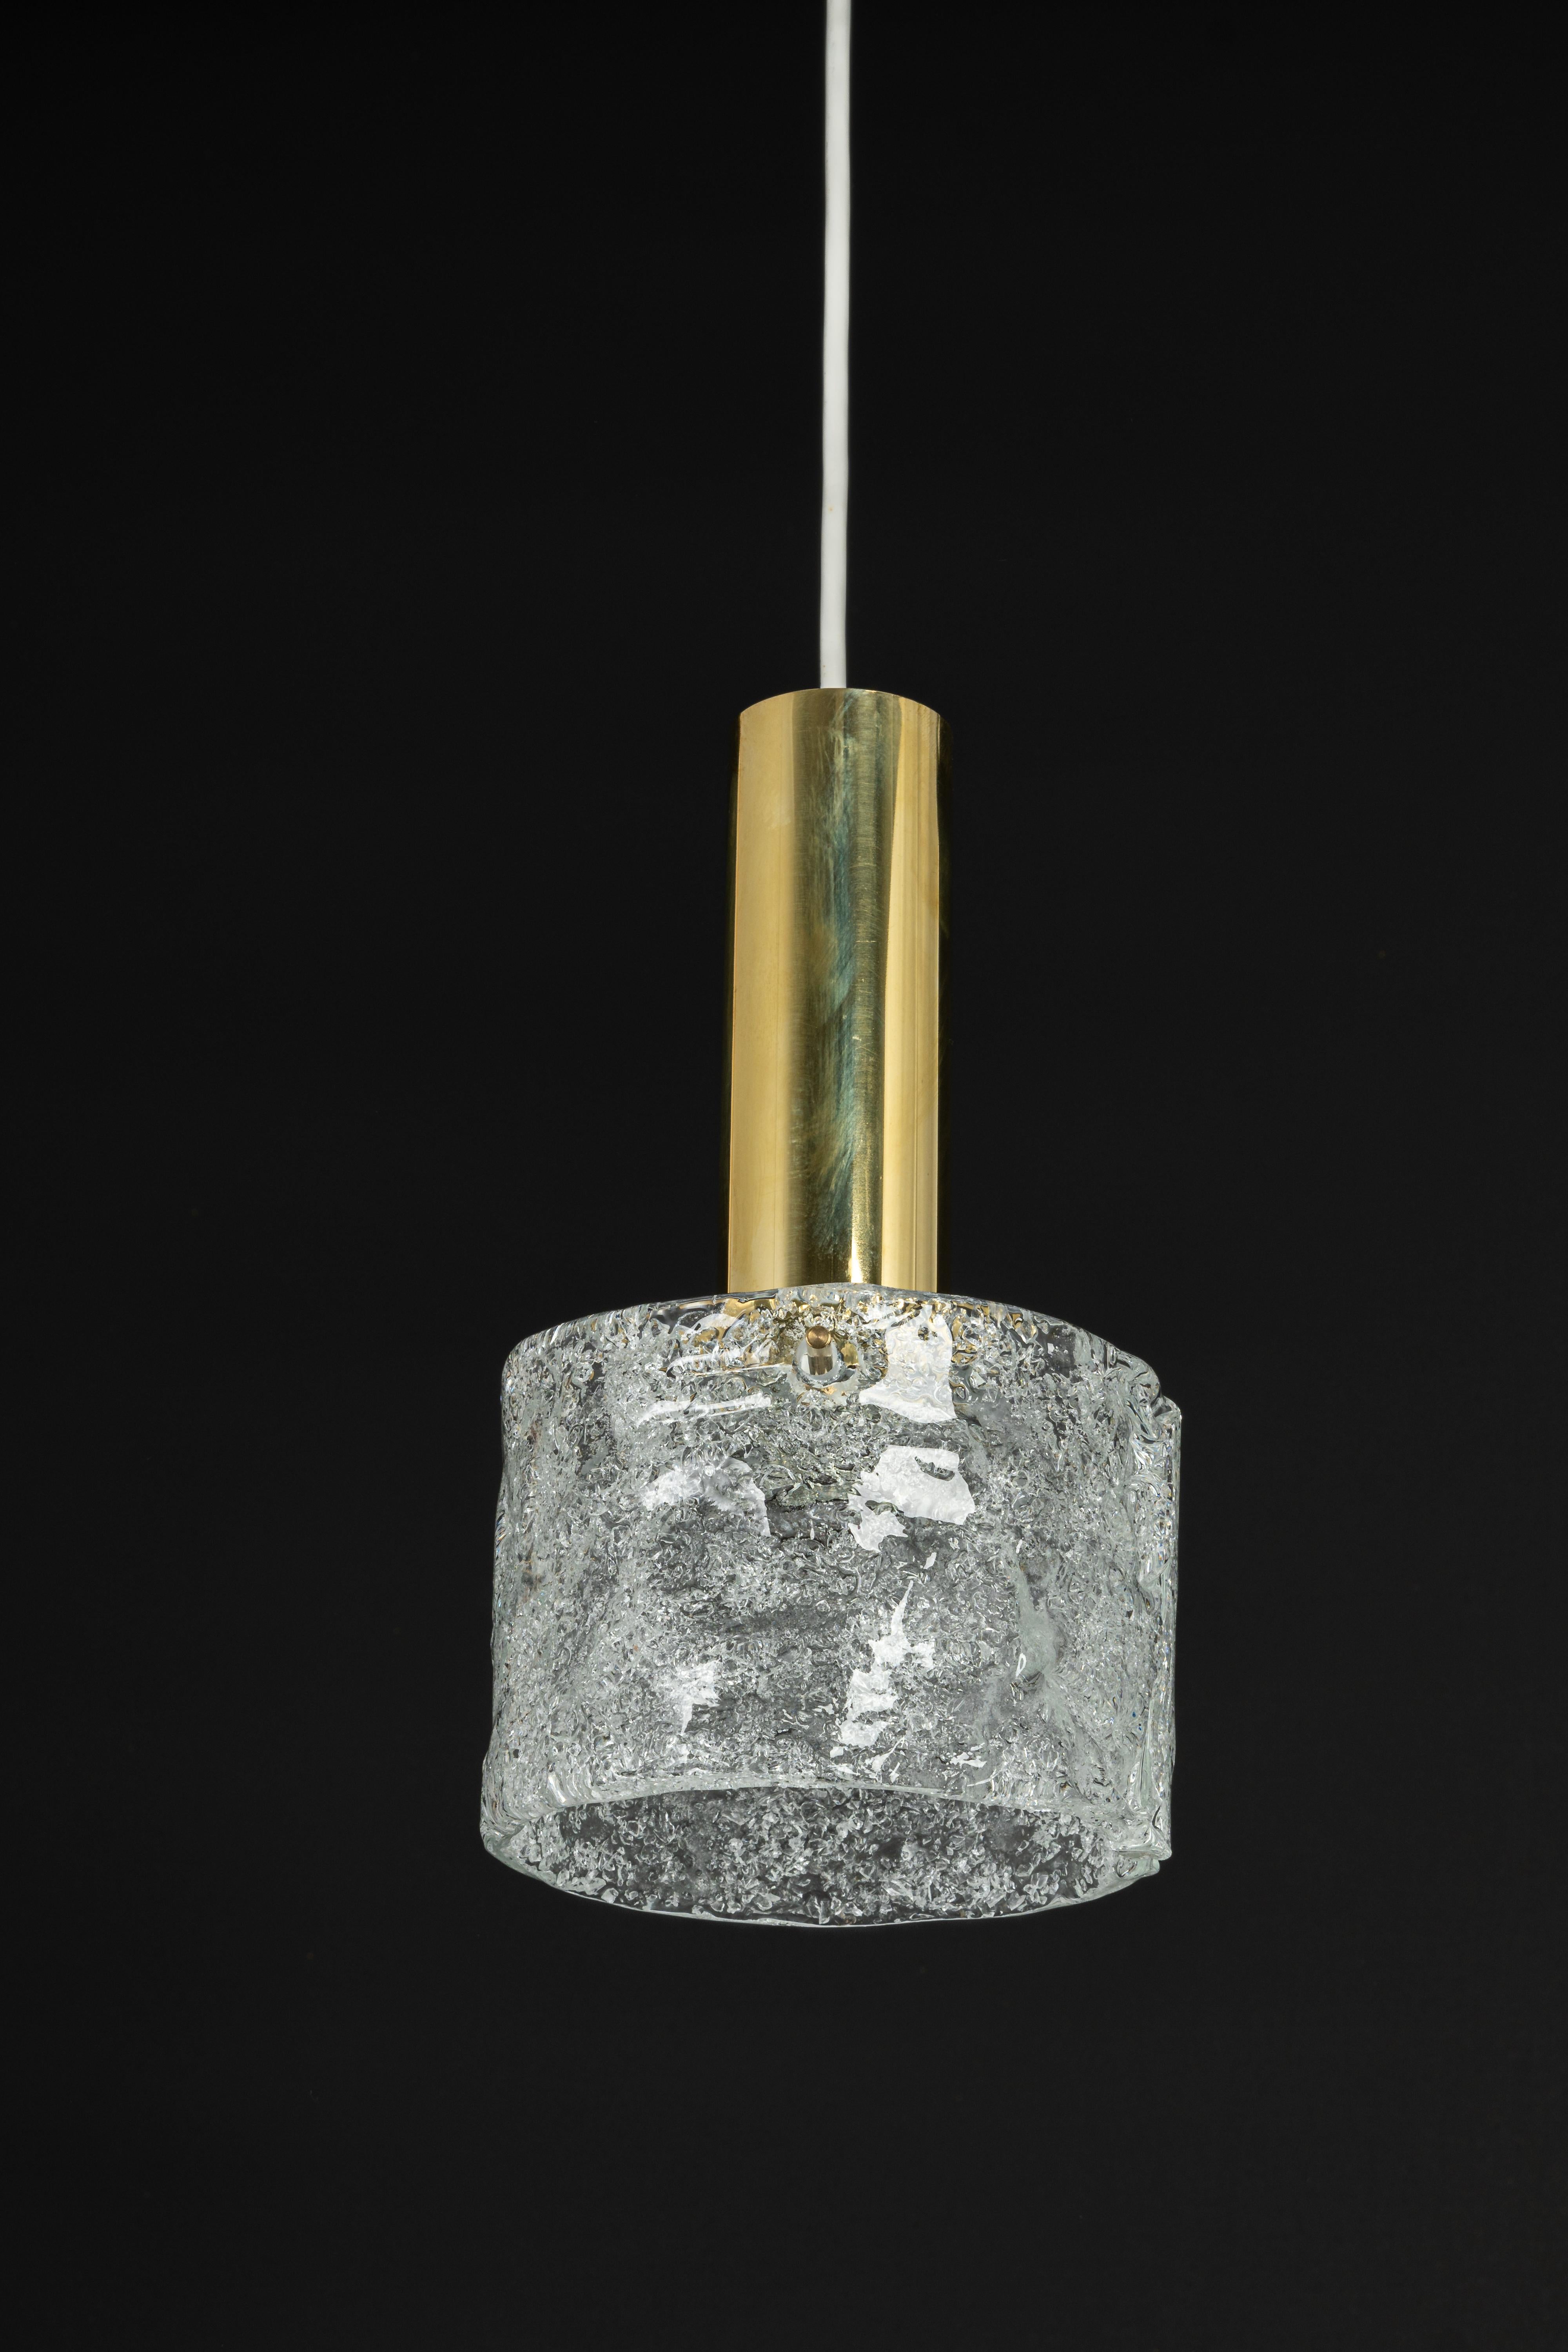 Mid-Century Modern 1 of 4 Petite Murano Pendant Lights by Hillebrand, 1960s For Sale